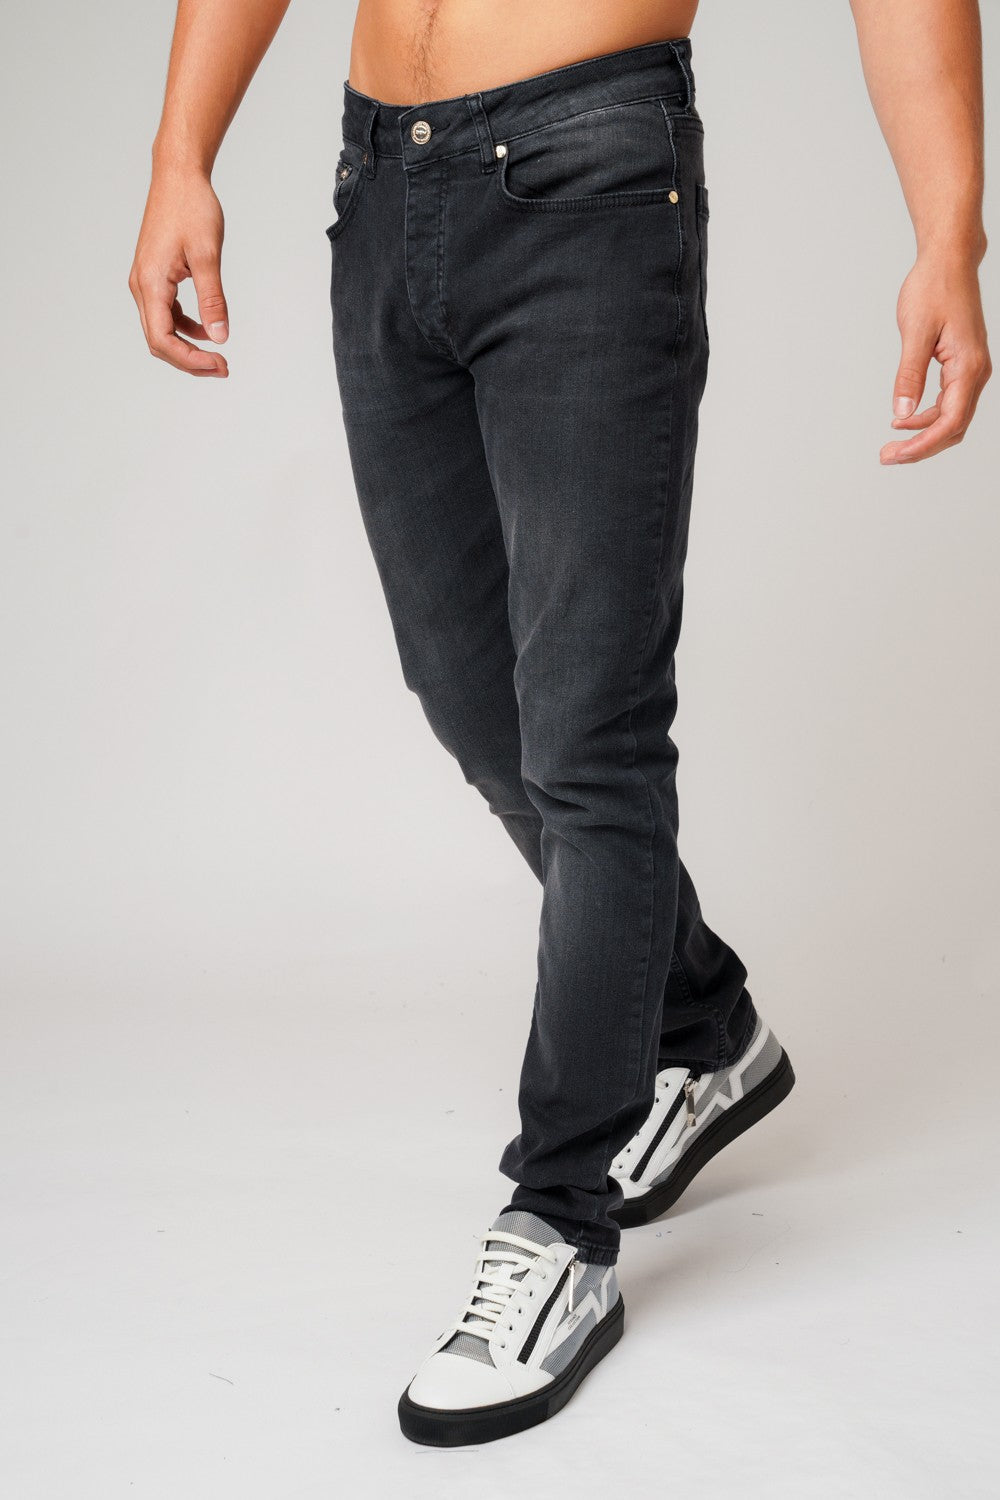 DON BLUE CARGO JEAN – Don Jeans